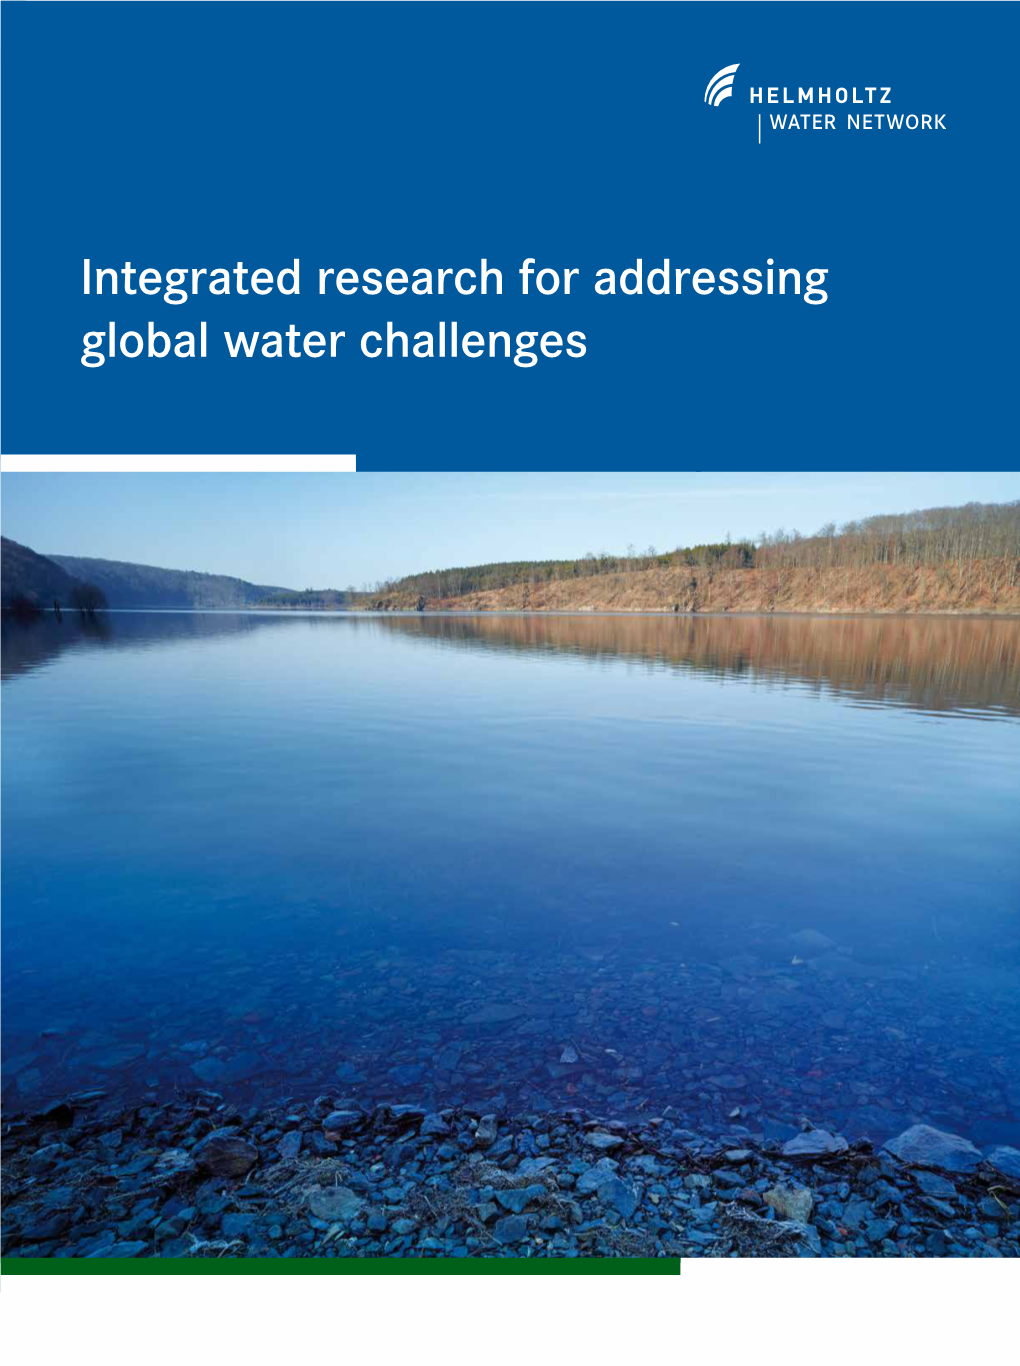 Integrated Research for Addressing Global Water Challenges